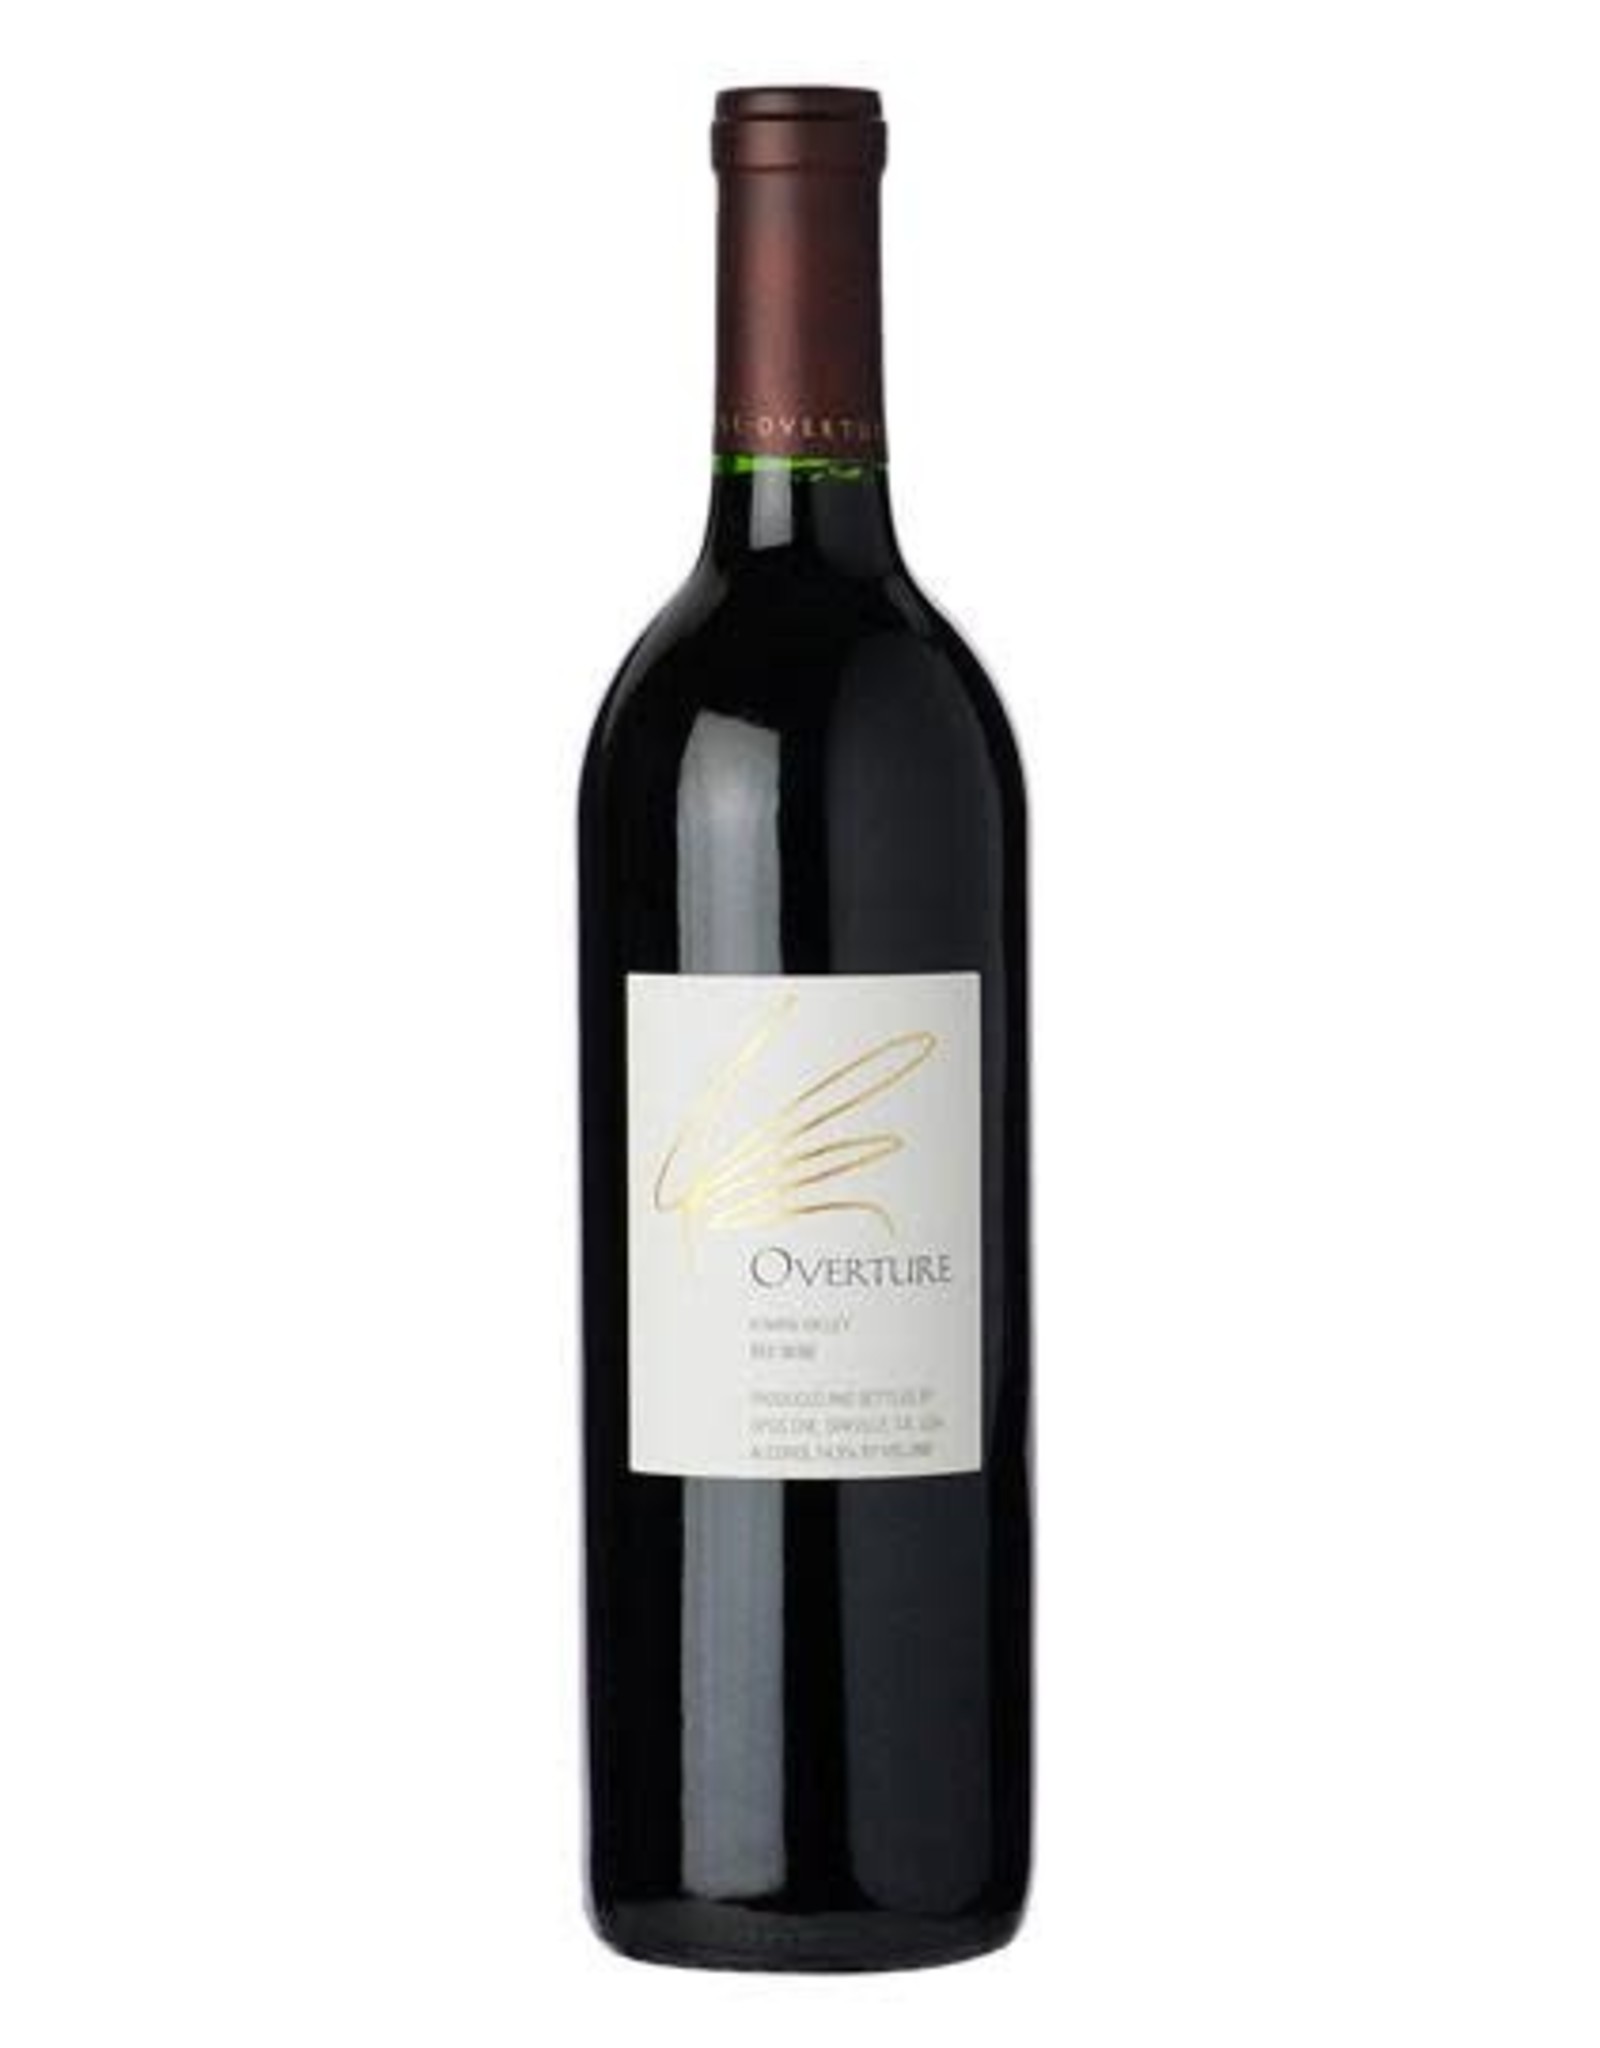 Opus One, Overture, NV